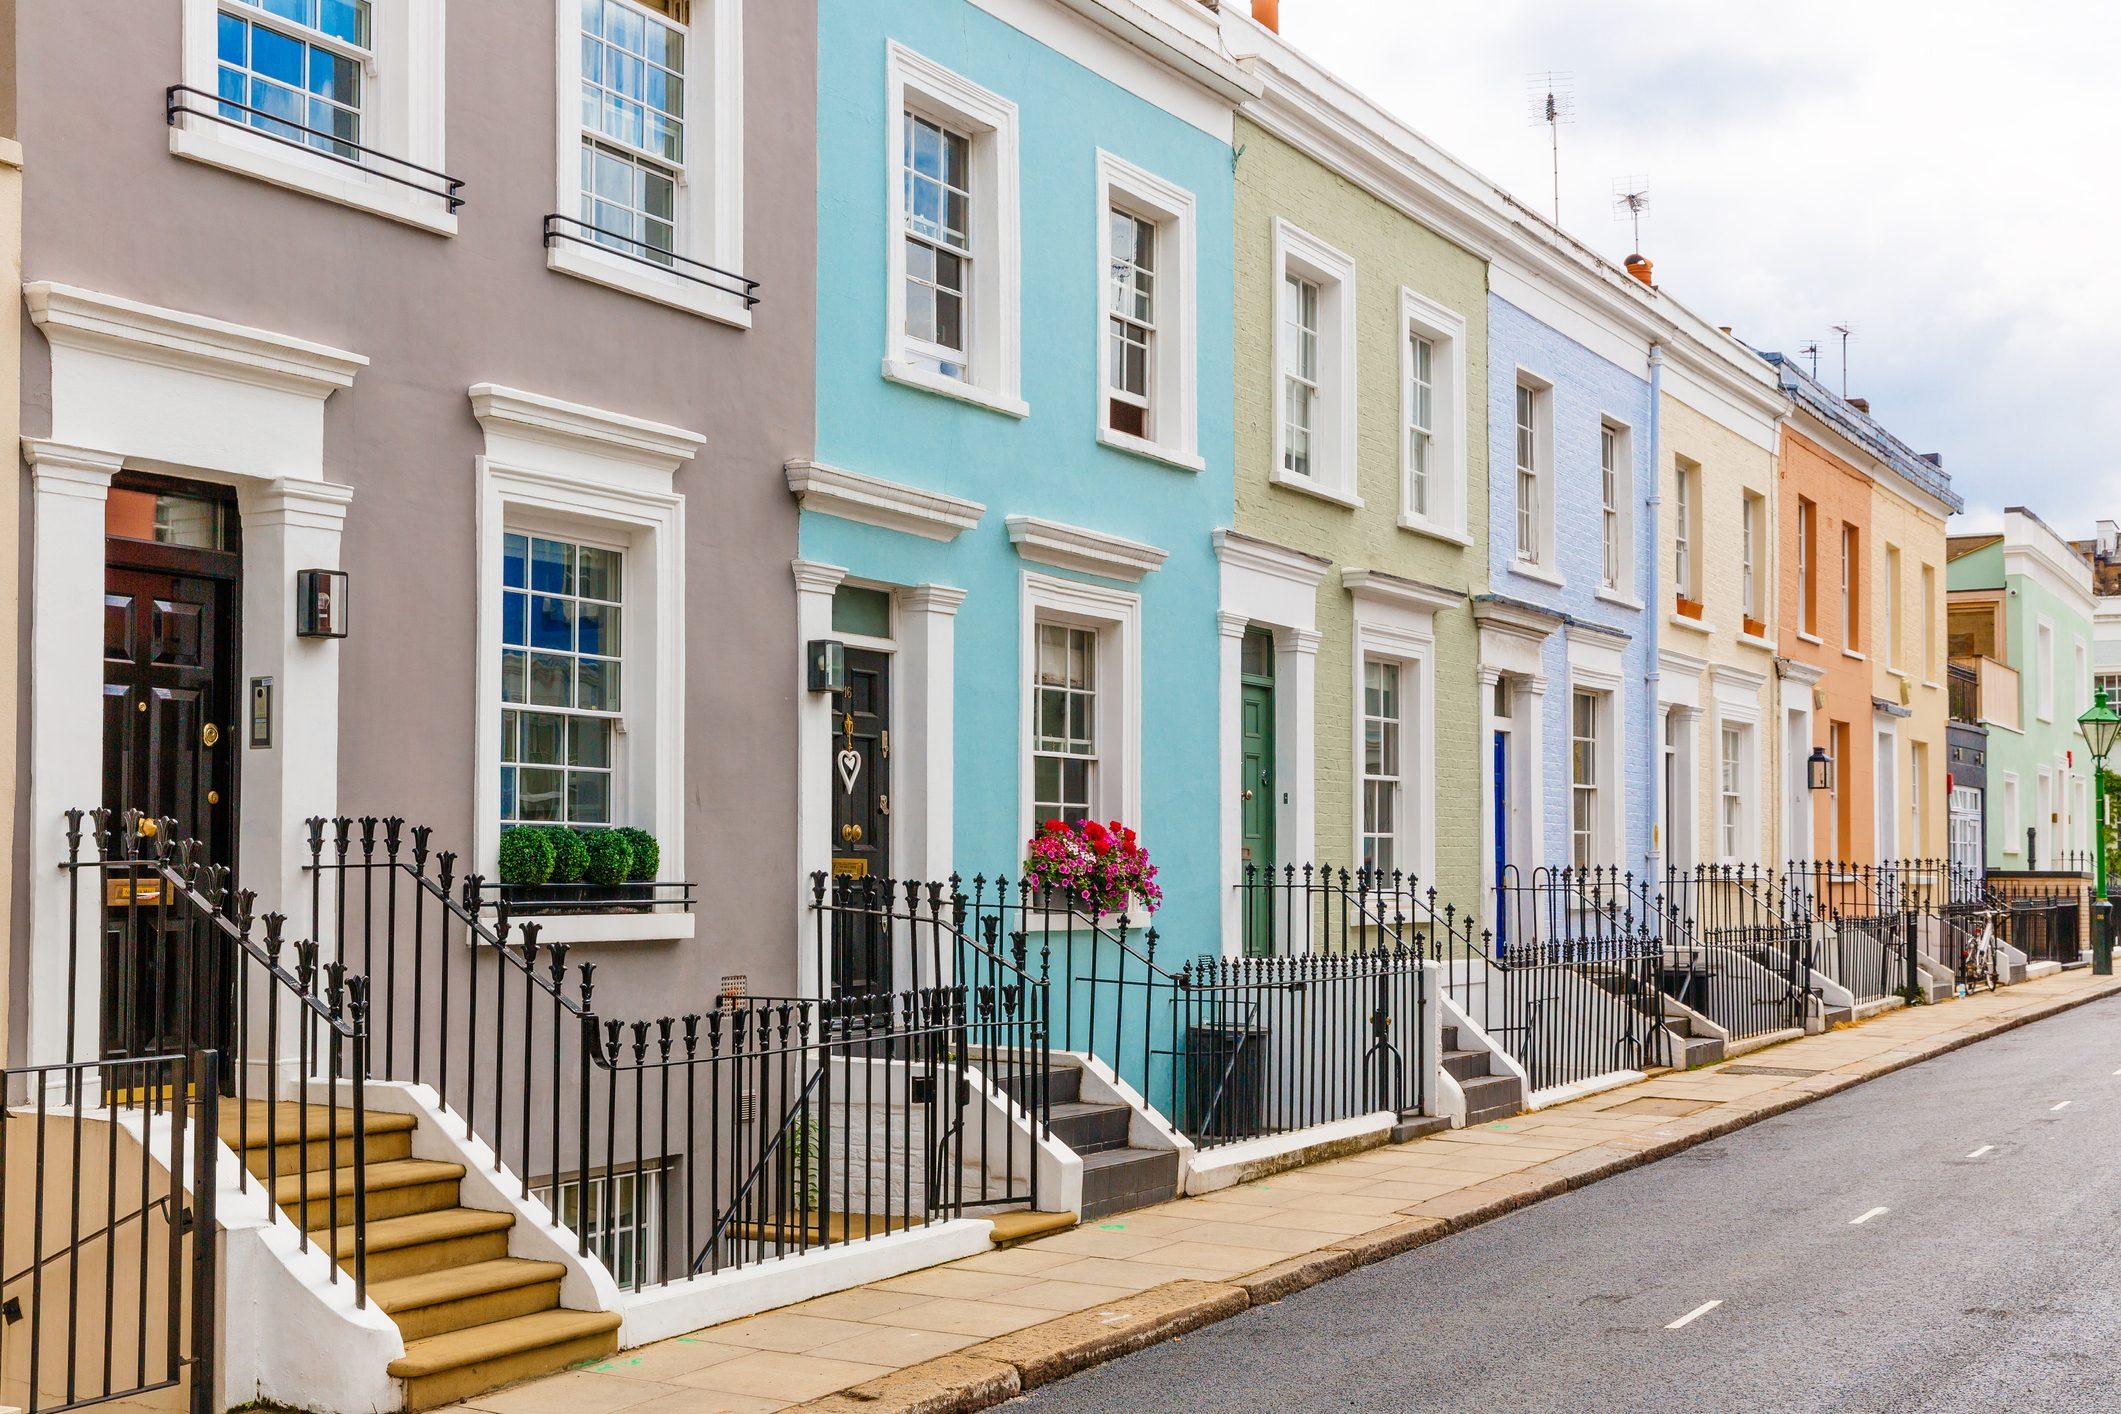 Why townhouse is cheaper than house UK?